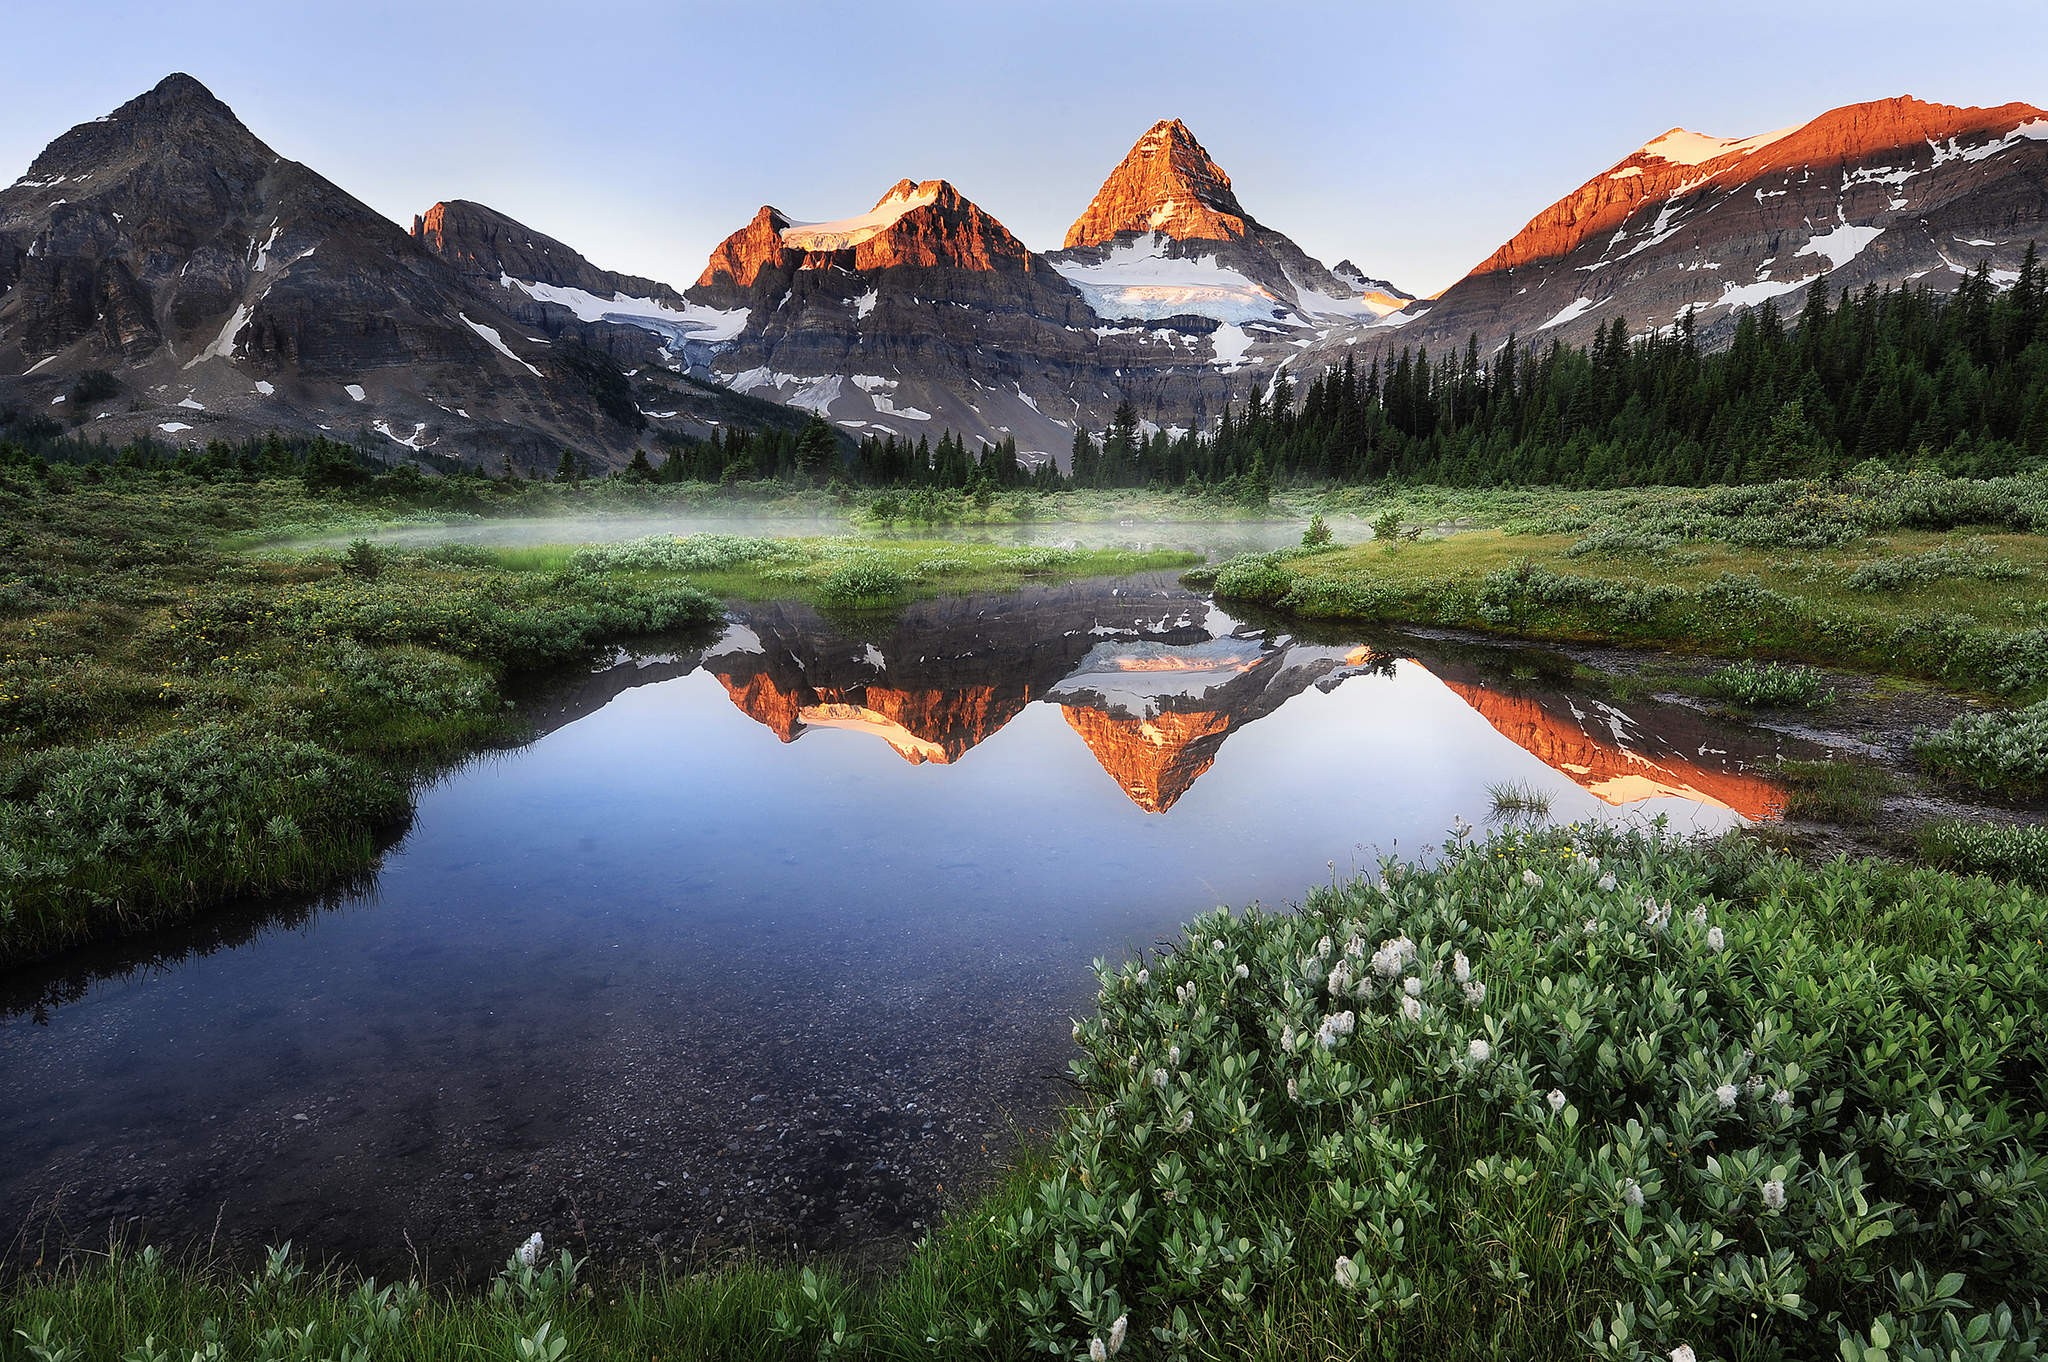 Summer Morning Mist Lake Mountains Nature Forest Snowy Peak Grass Landscape Water Green Wildflowers  2048x1362